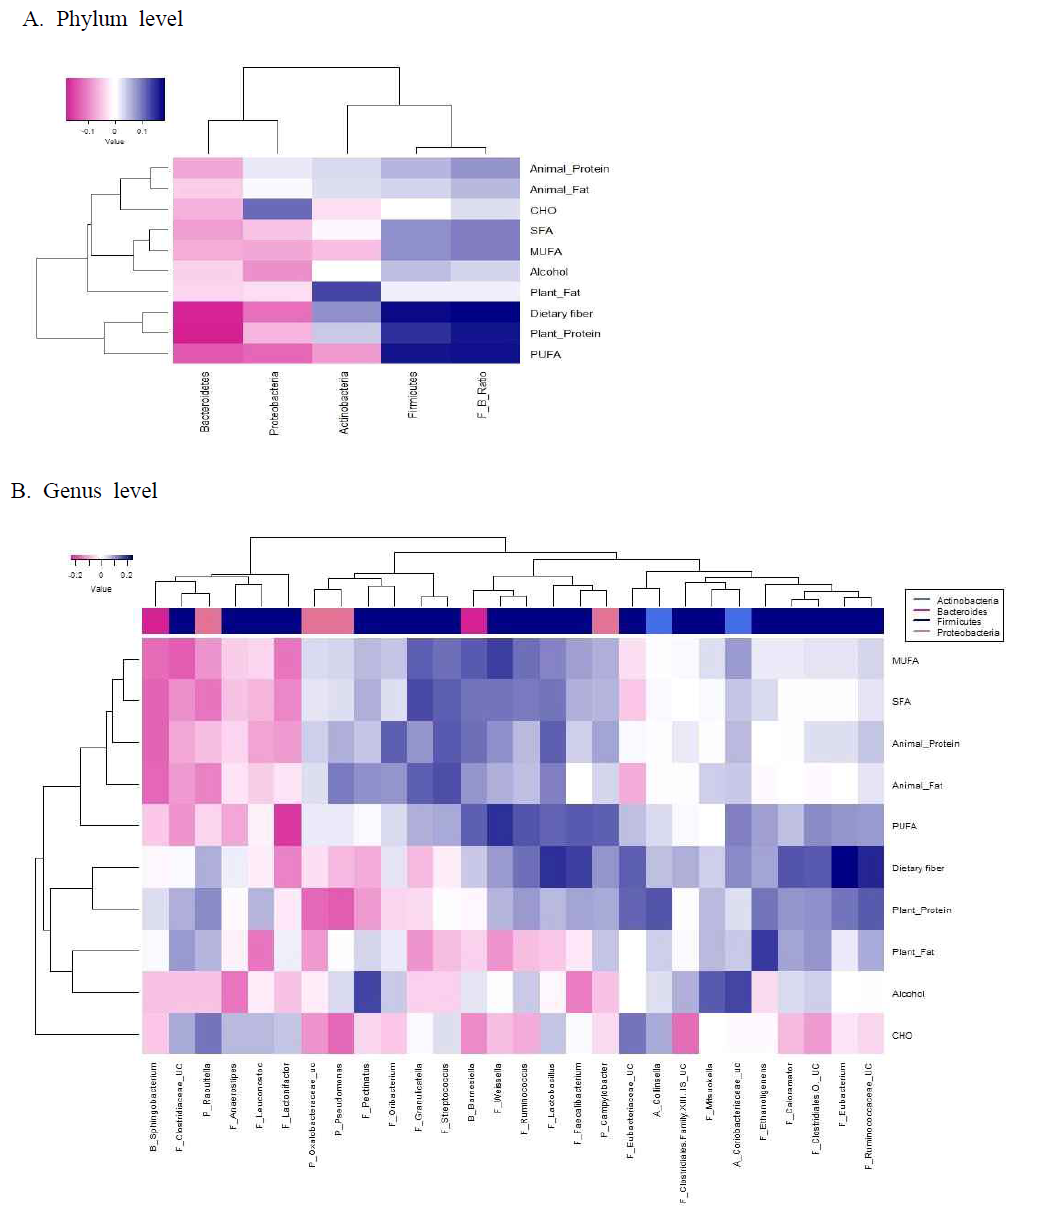 Heatmaps of partial Spearman correlations between of intakes of macronutrients and relative abundance of gut microbiota at phylum (a) and genus (b) levels in the NAS-IARC cross-sectional study (n=222 participants). Partial Spearman correlation analysis adjusted for age, BMI, sex, dietary supplement intake, smoking status, and batch effect; The intakes of macronutrients were log-transformed and adjusted for total energy intake using the residual method; Firmicutes-to-Bacteriodetes ratio was labeled as F_B_Ratio in the heatmap (a); The names of genera were labeled as phylum initial(B, P, A or F)_genus in the heatmap (b)